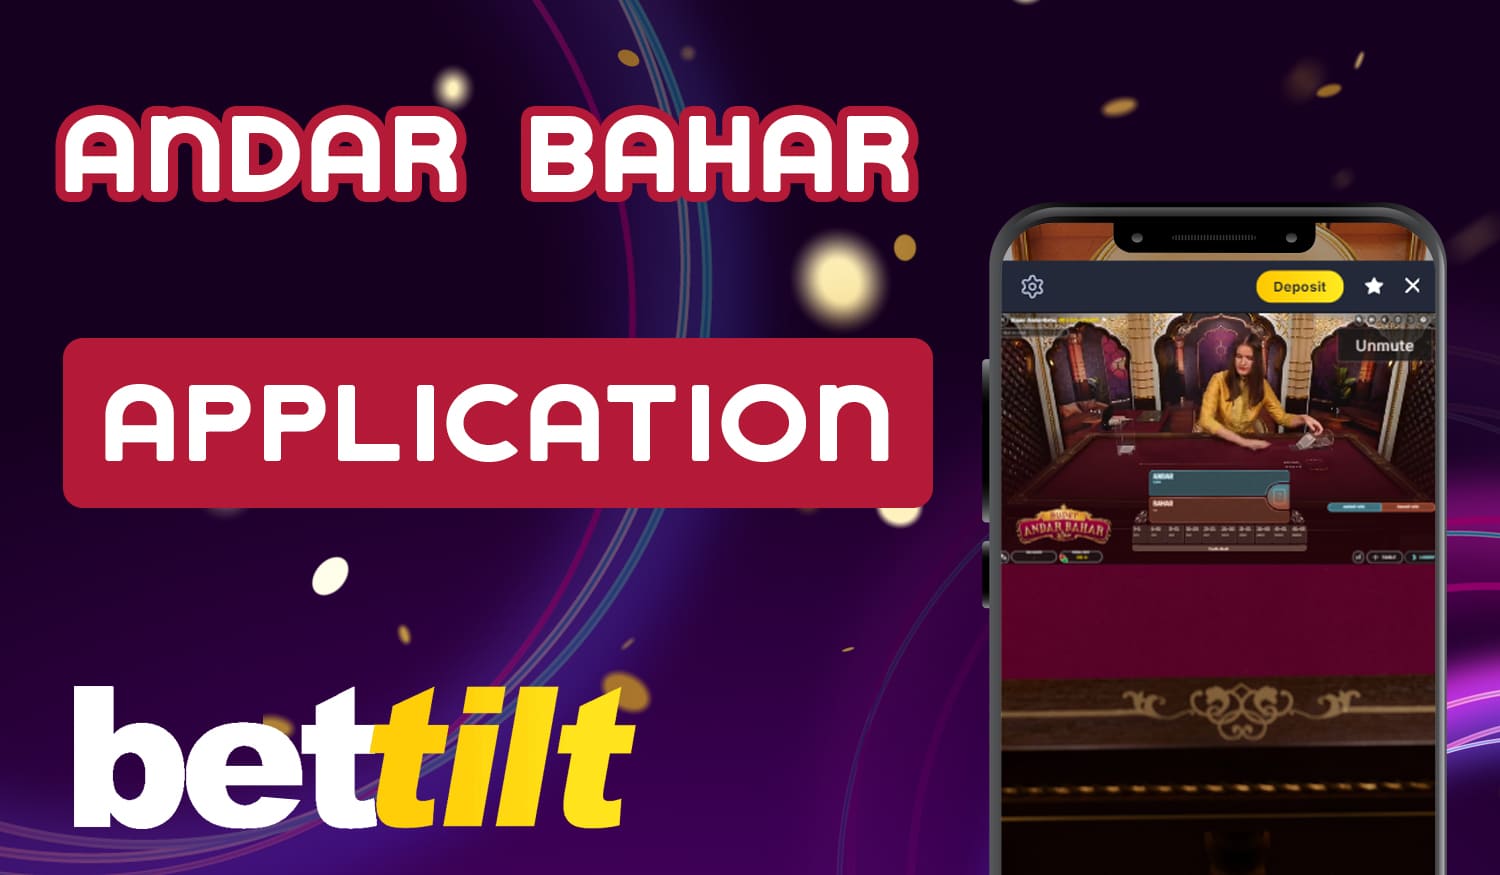 Instructions on how to download Bettilt mobile application on Android and iOS